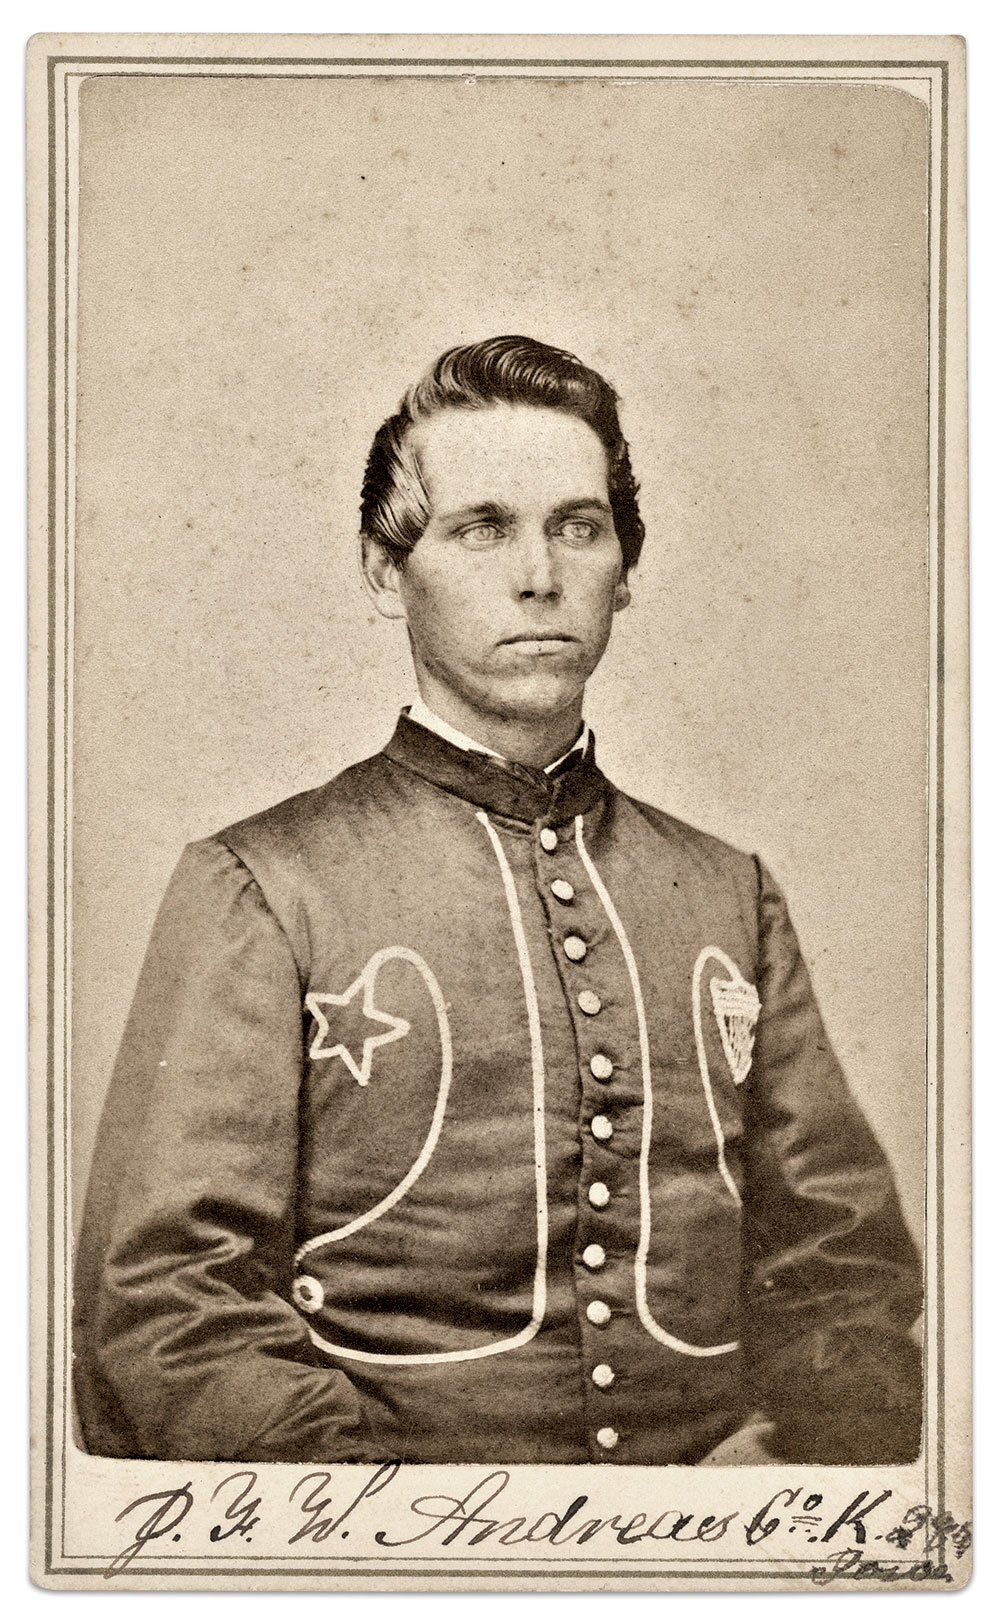 The smaller looping along the bottom and back of the jacket is visible in this portrait of Pvt. John F.W. Andreas (about 1841-1864) of Company K. Andreas lost his life in the Third Battle of Winchester. Carte de visite by an unidentified photographer. Mark Warren Collection.